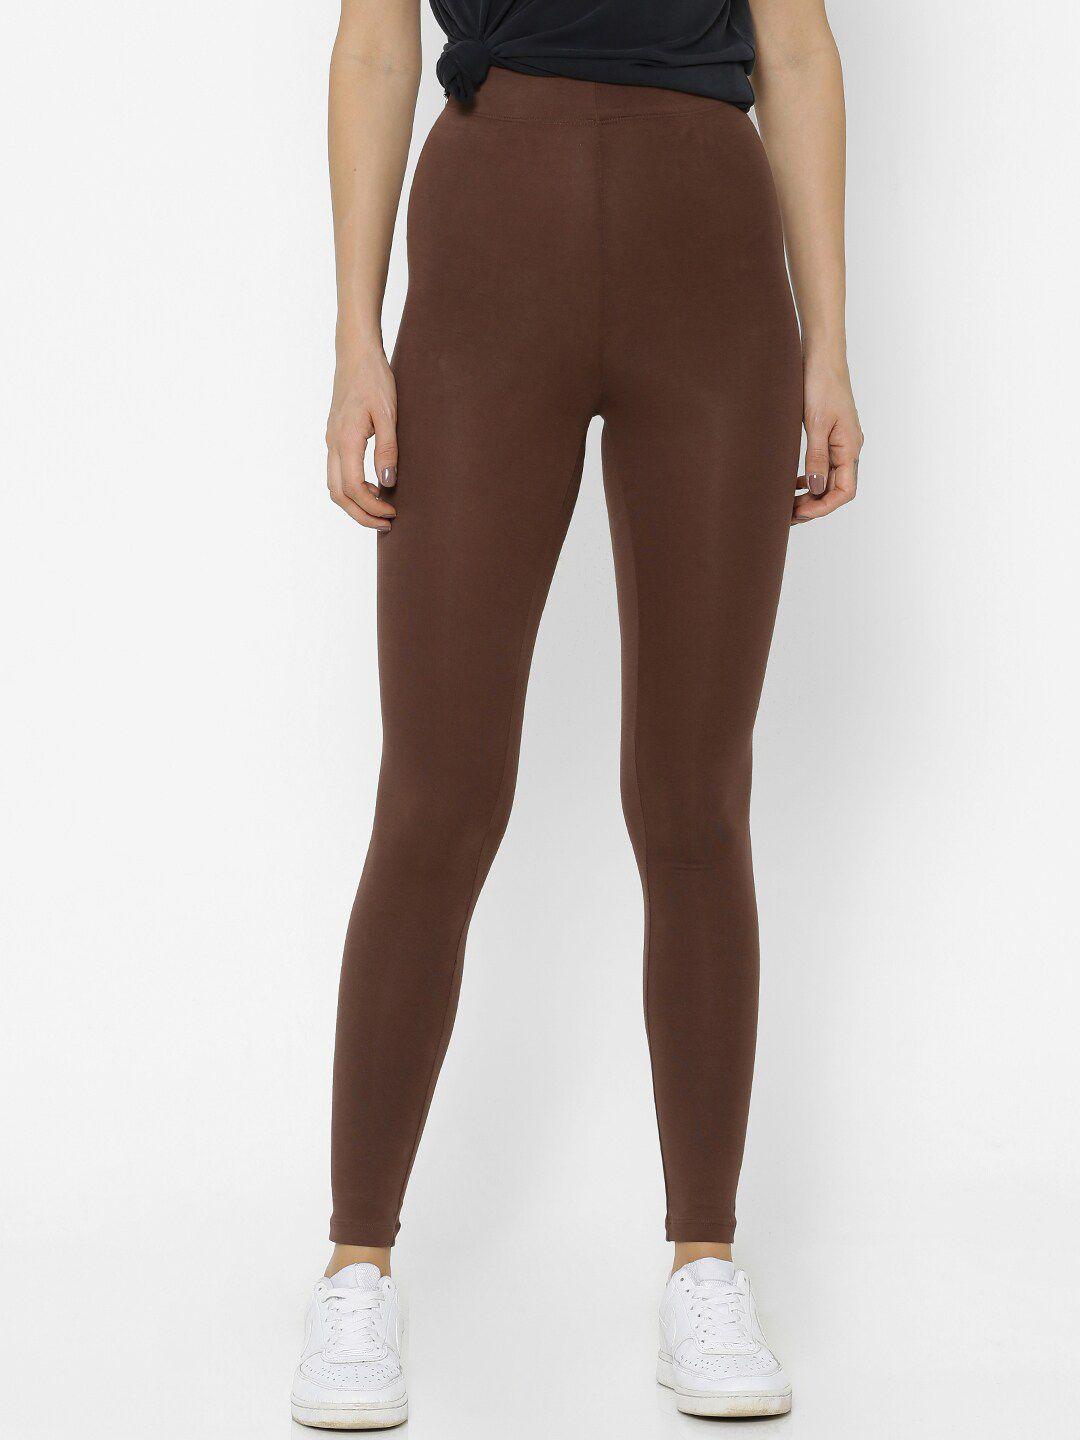 forever-21-women-brown-solid-ankle-length-tights